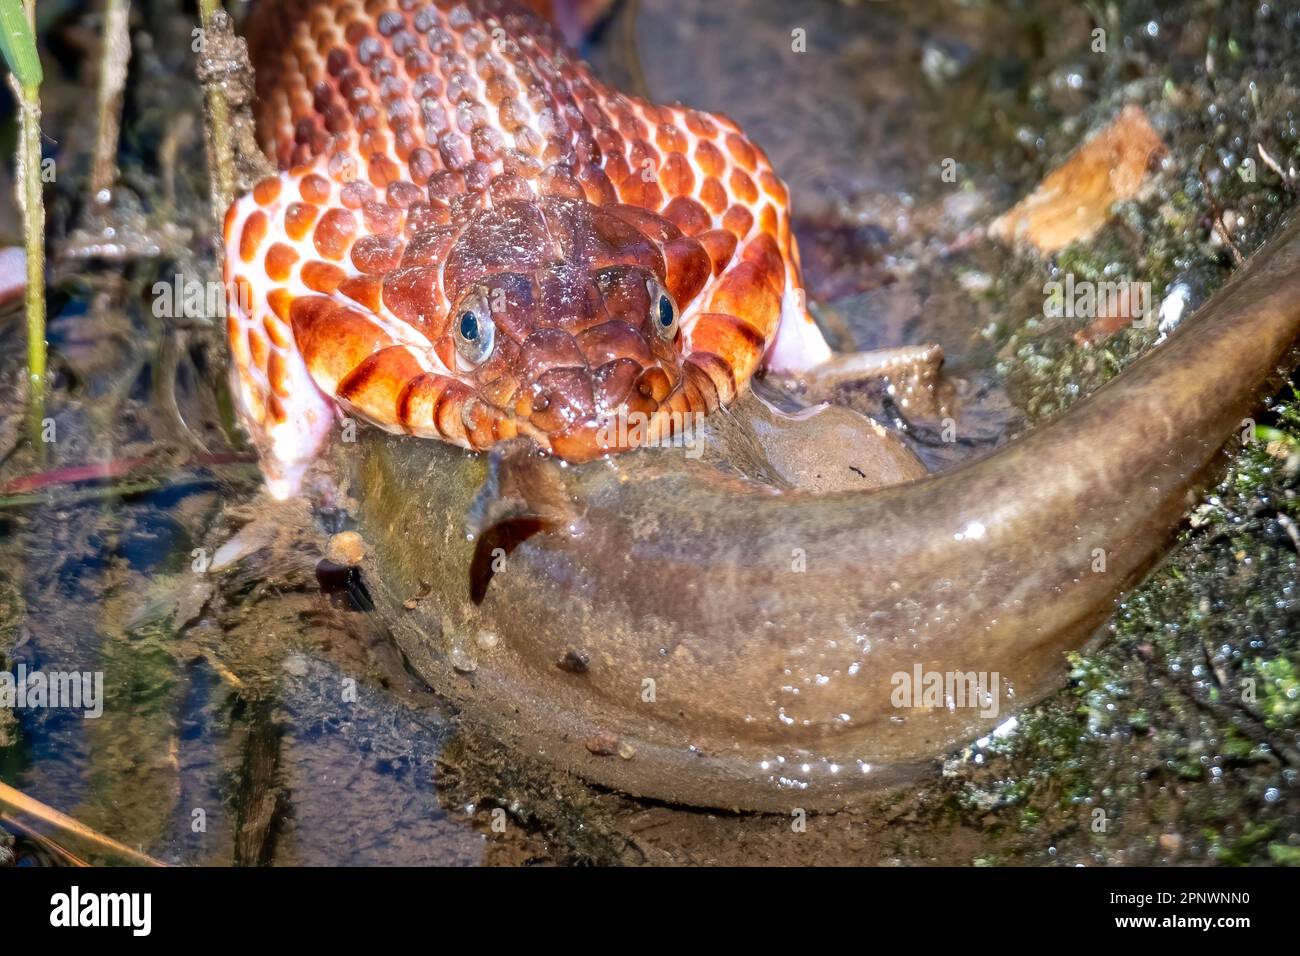 Front view of a Northern Water Snake taking its time to swallow down a relatively large catfish. Raleigh, North Carolina. Stock Photo